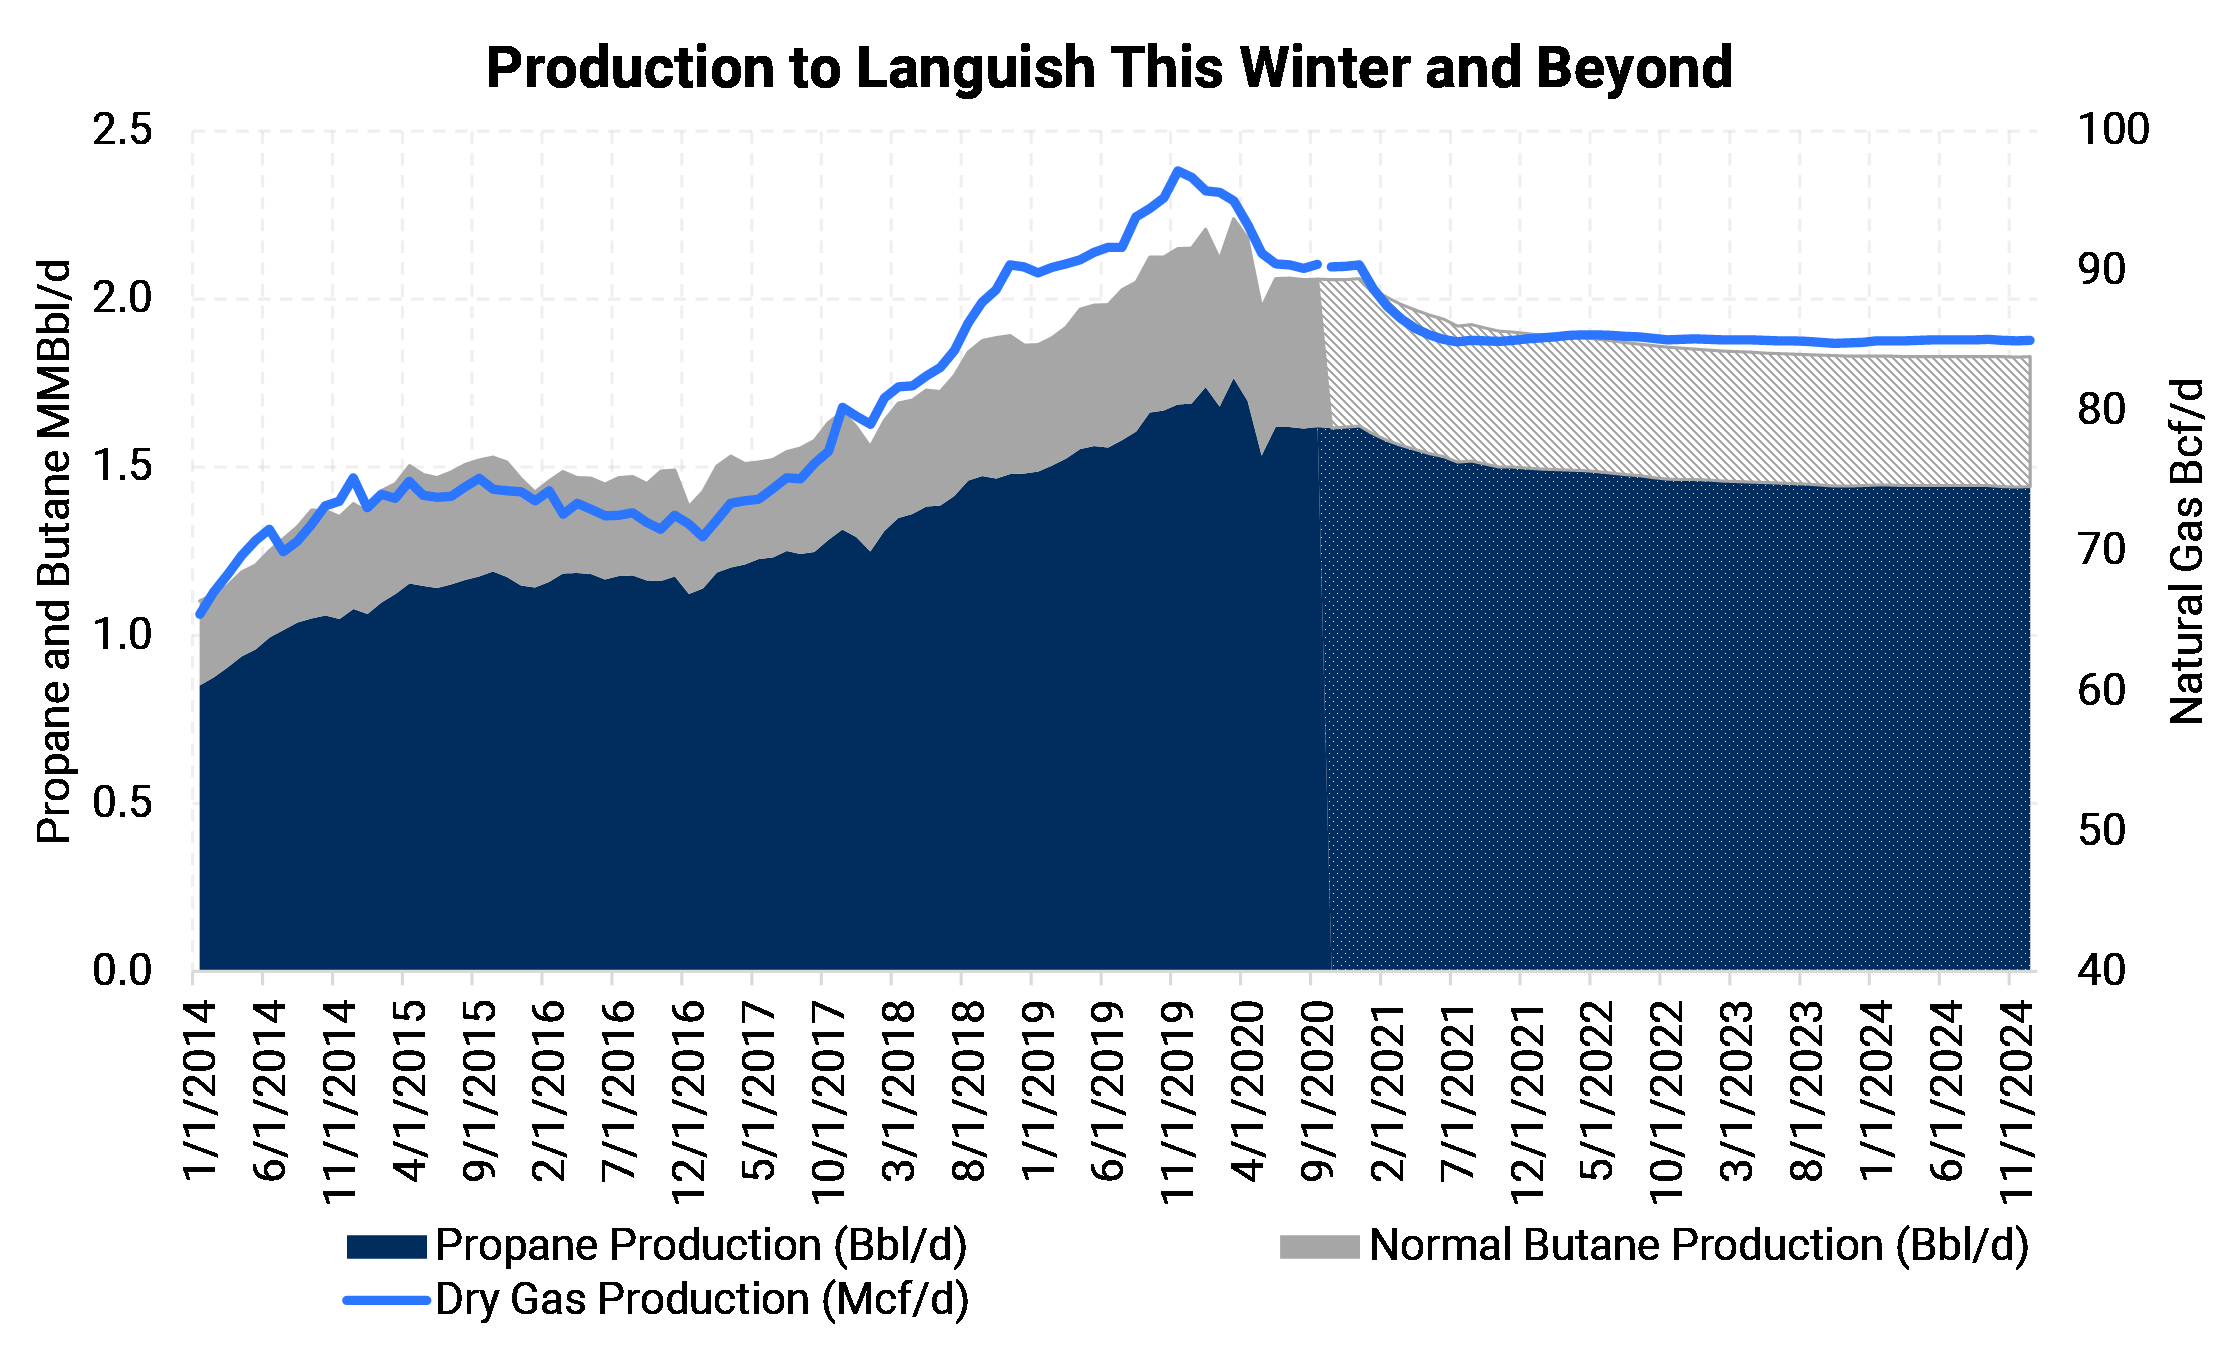 Propane Production over time